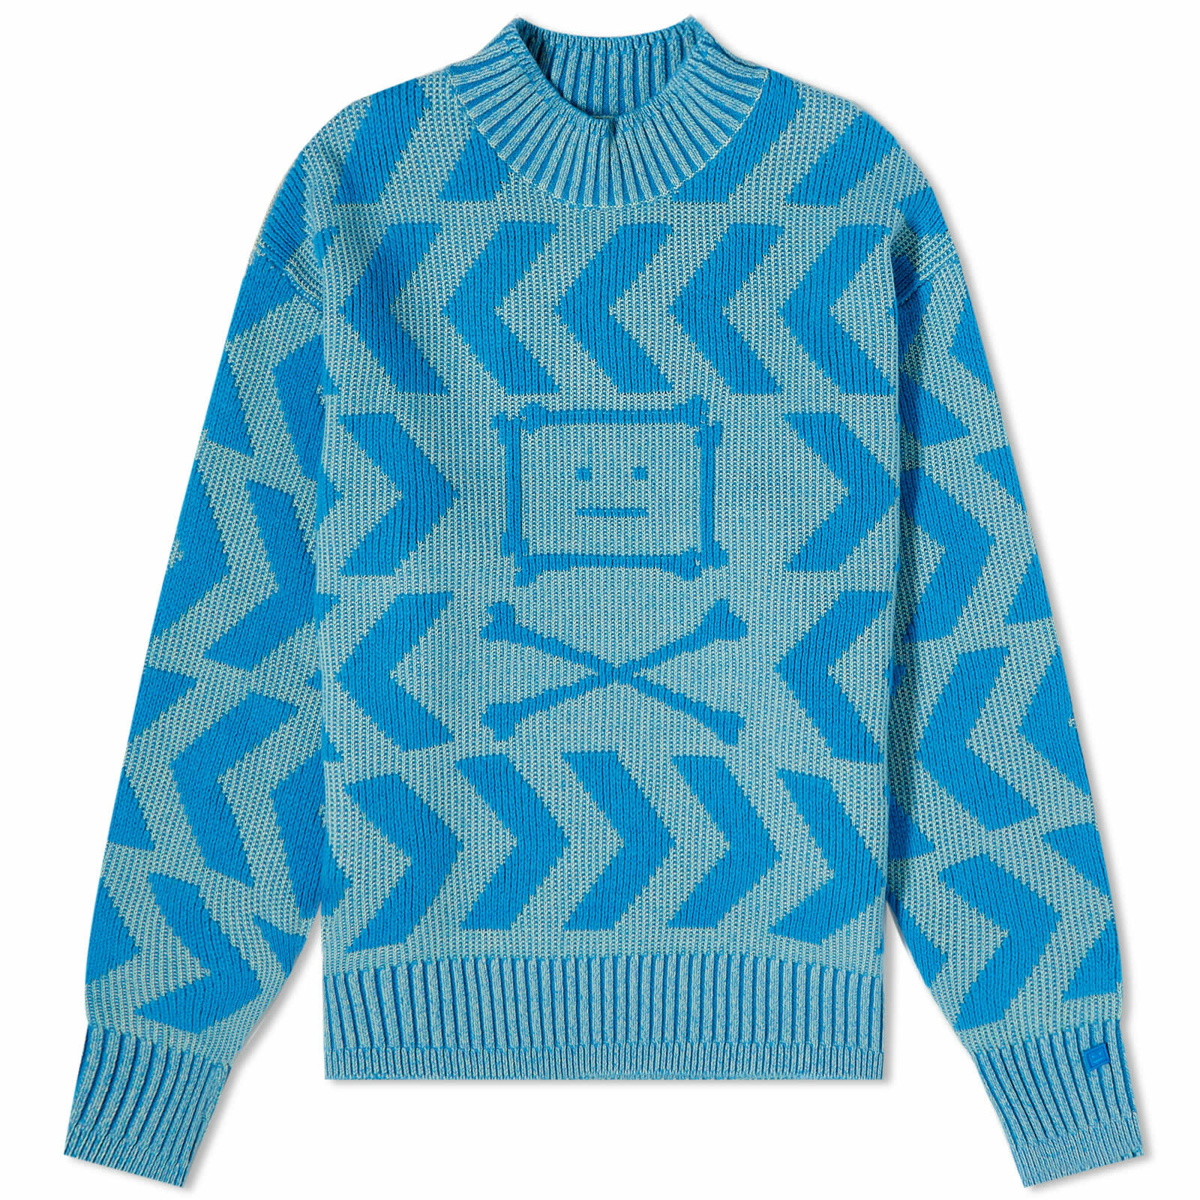 Acne Studios Keith Cross Bones Face Relaxed Crew Knit in Spearmint ...